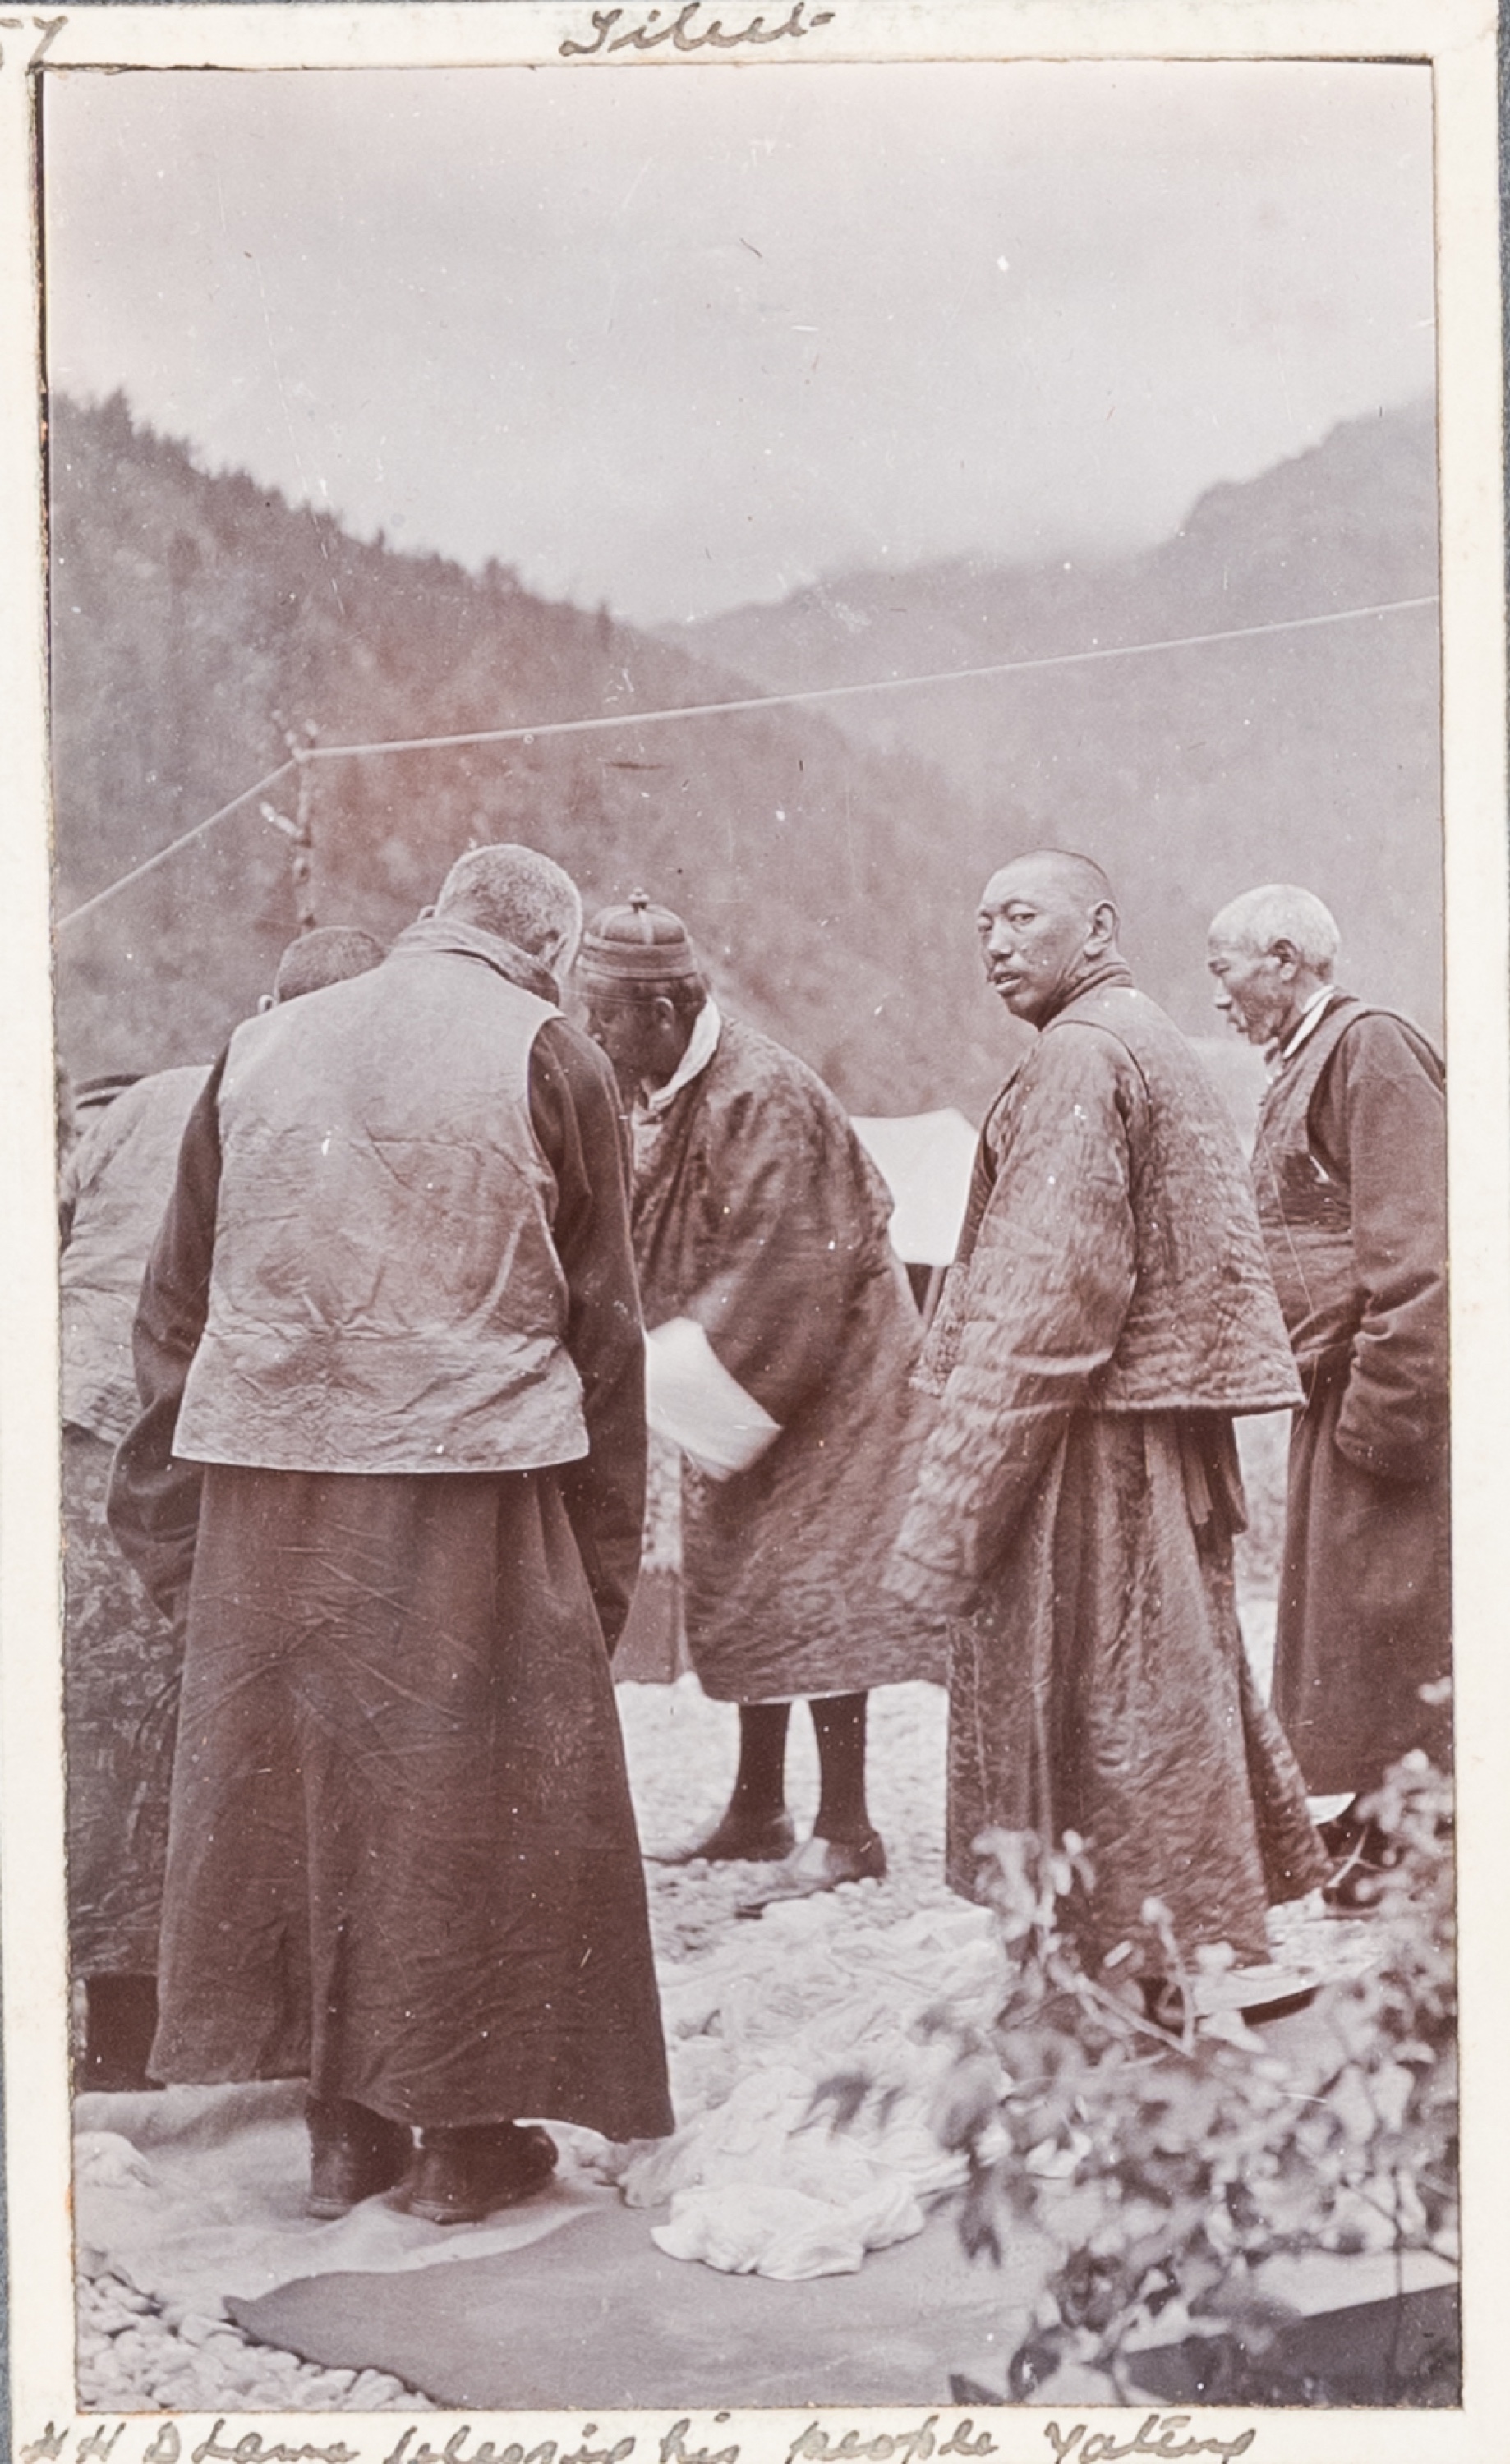 A rare photo album on the 13th Dalai Lama's return from exile from India, ca. 1912/1913 - Image 17 of 21